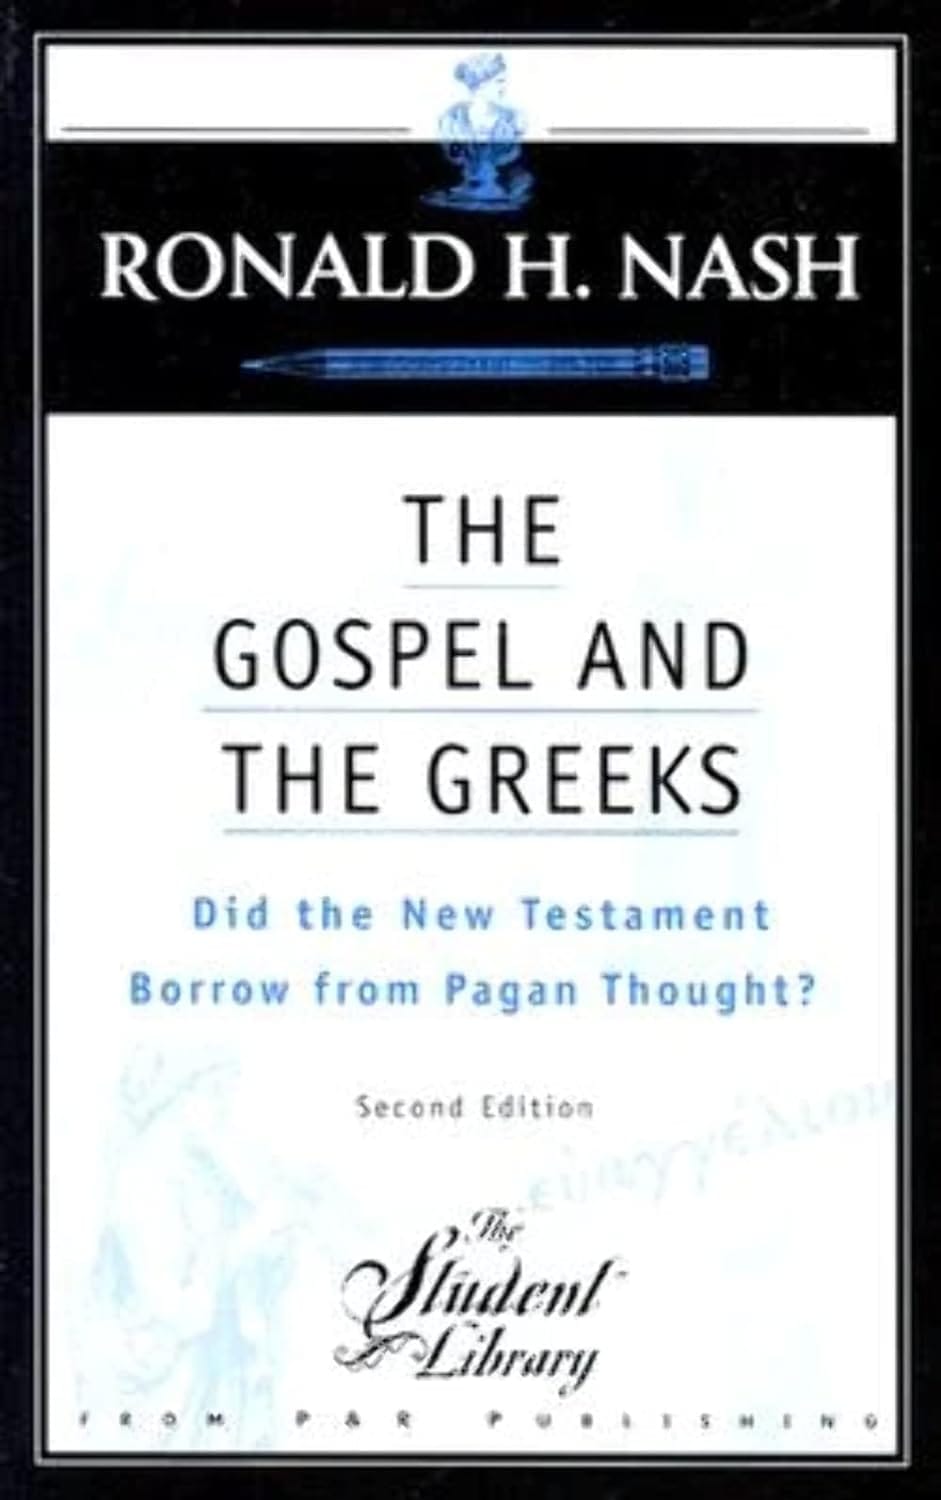 Book Review: Examining the Roots: A Review of The Gospel and the Greeks